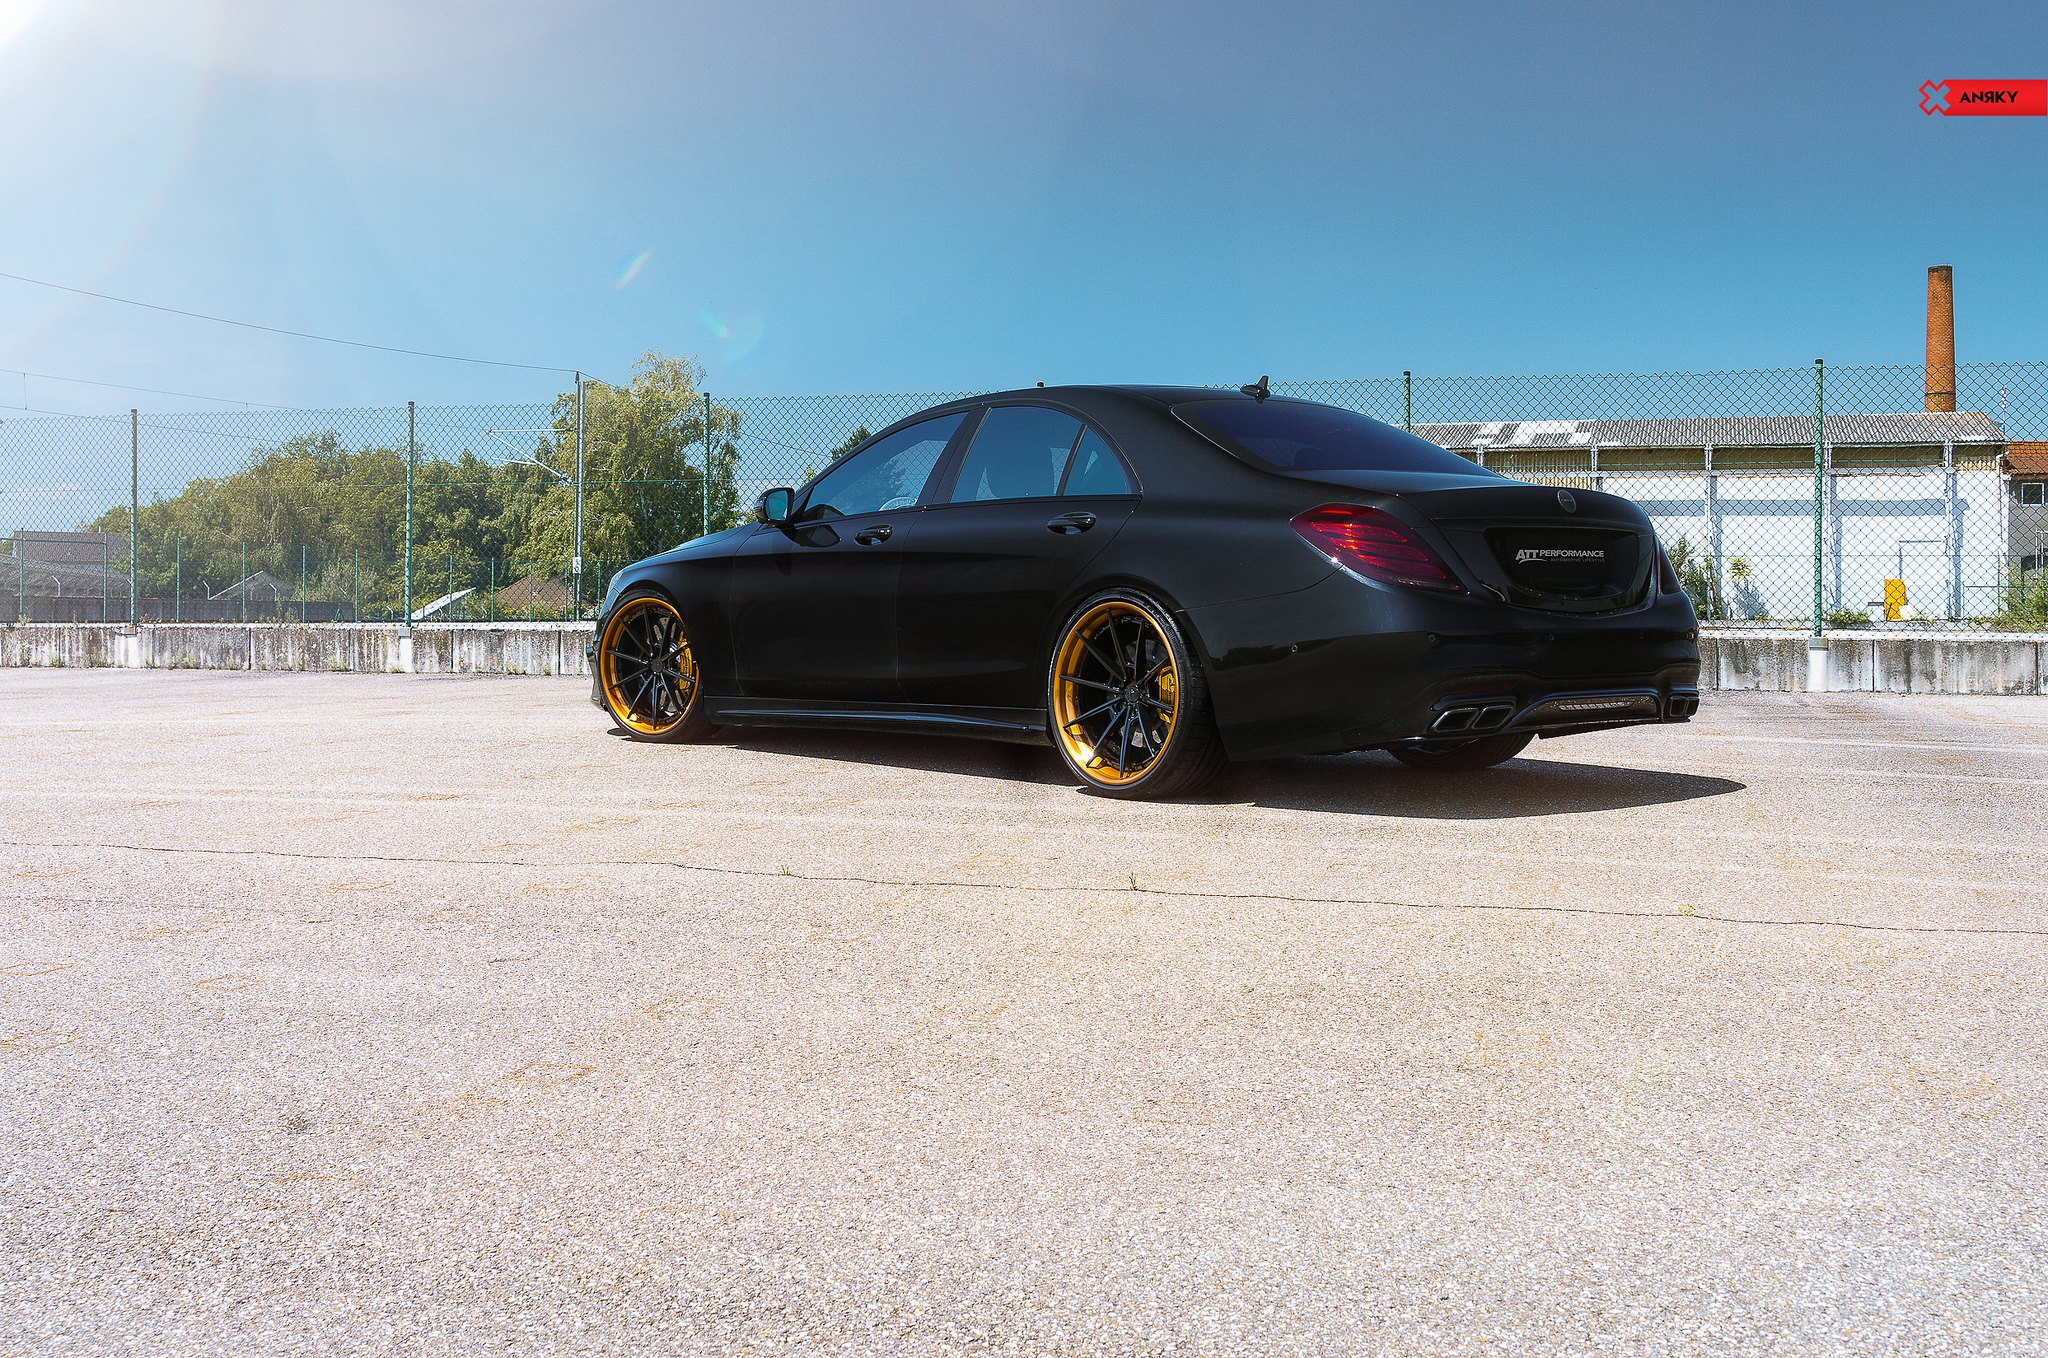 Red Smoke Taillights on Black Mercedes S Class - Photo by Anrky Wheels